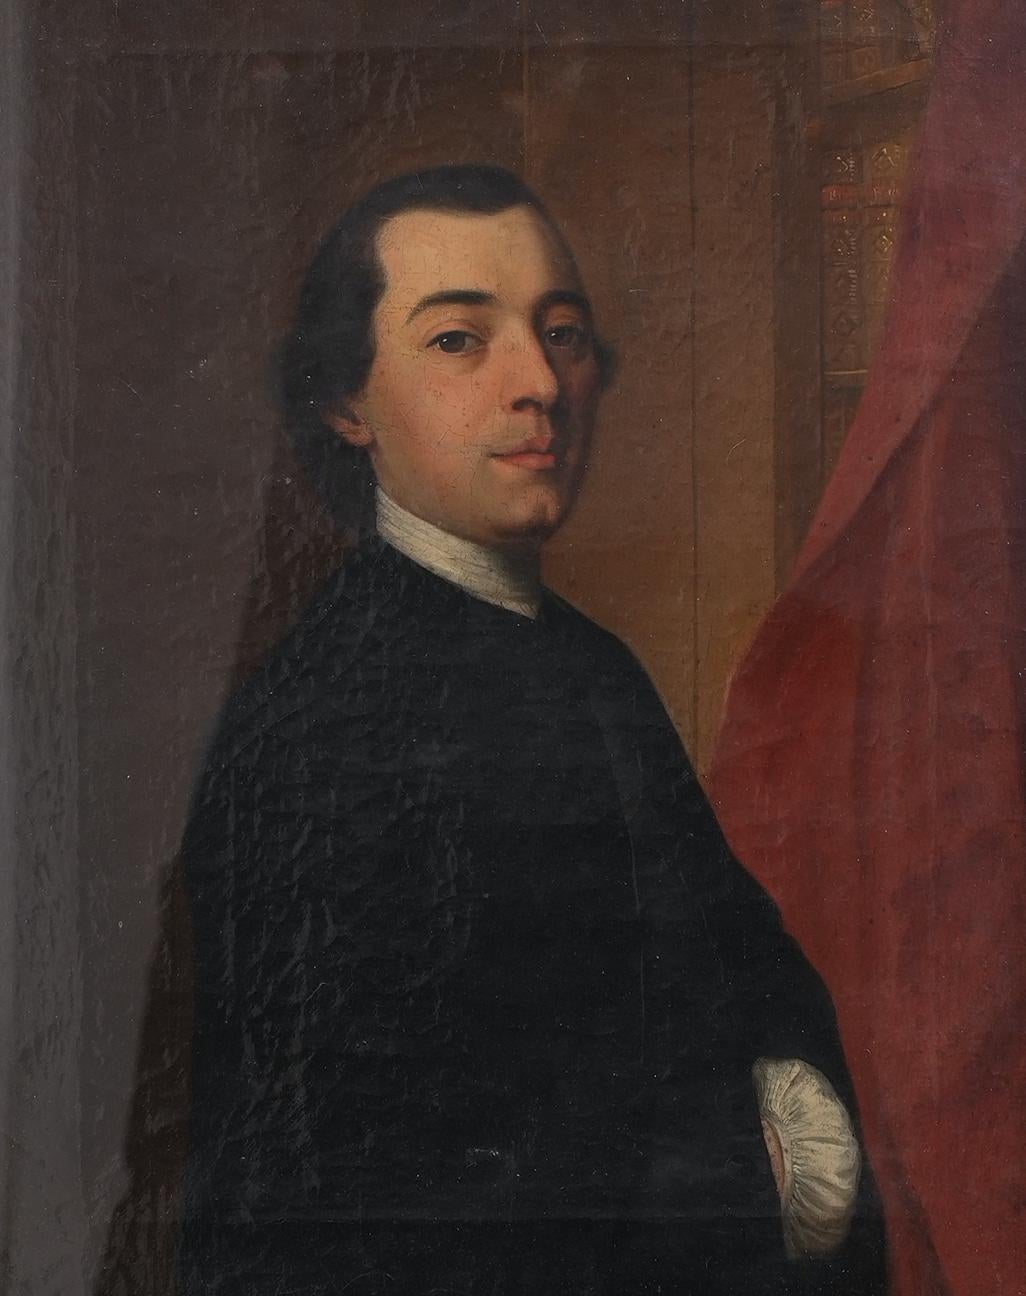 An oil-on-canvas portrait of an Italian nobleman from the period c. 1760. The subject poses in front of his extensive library. The canvas and frame are in excellent condition. The mat and acrylic cover are recent.